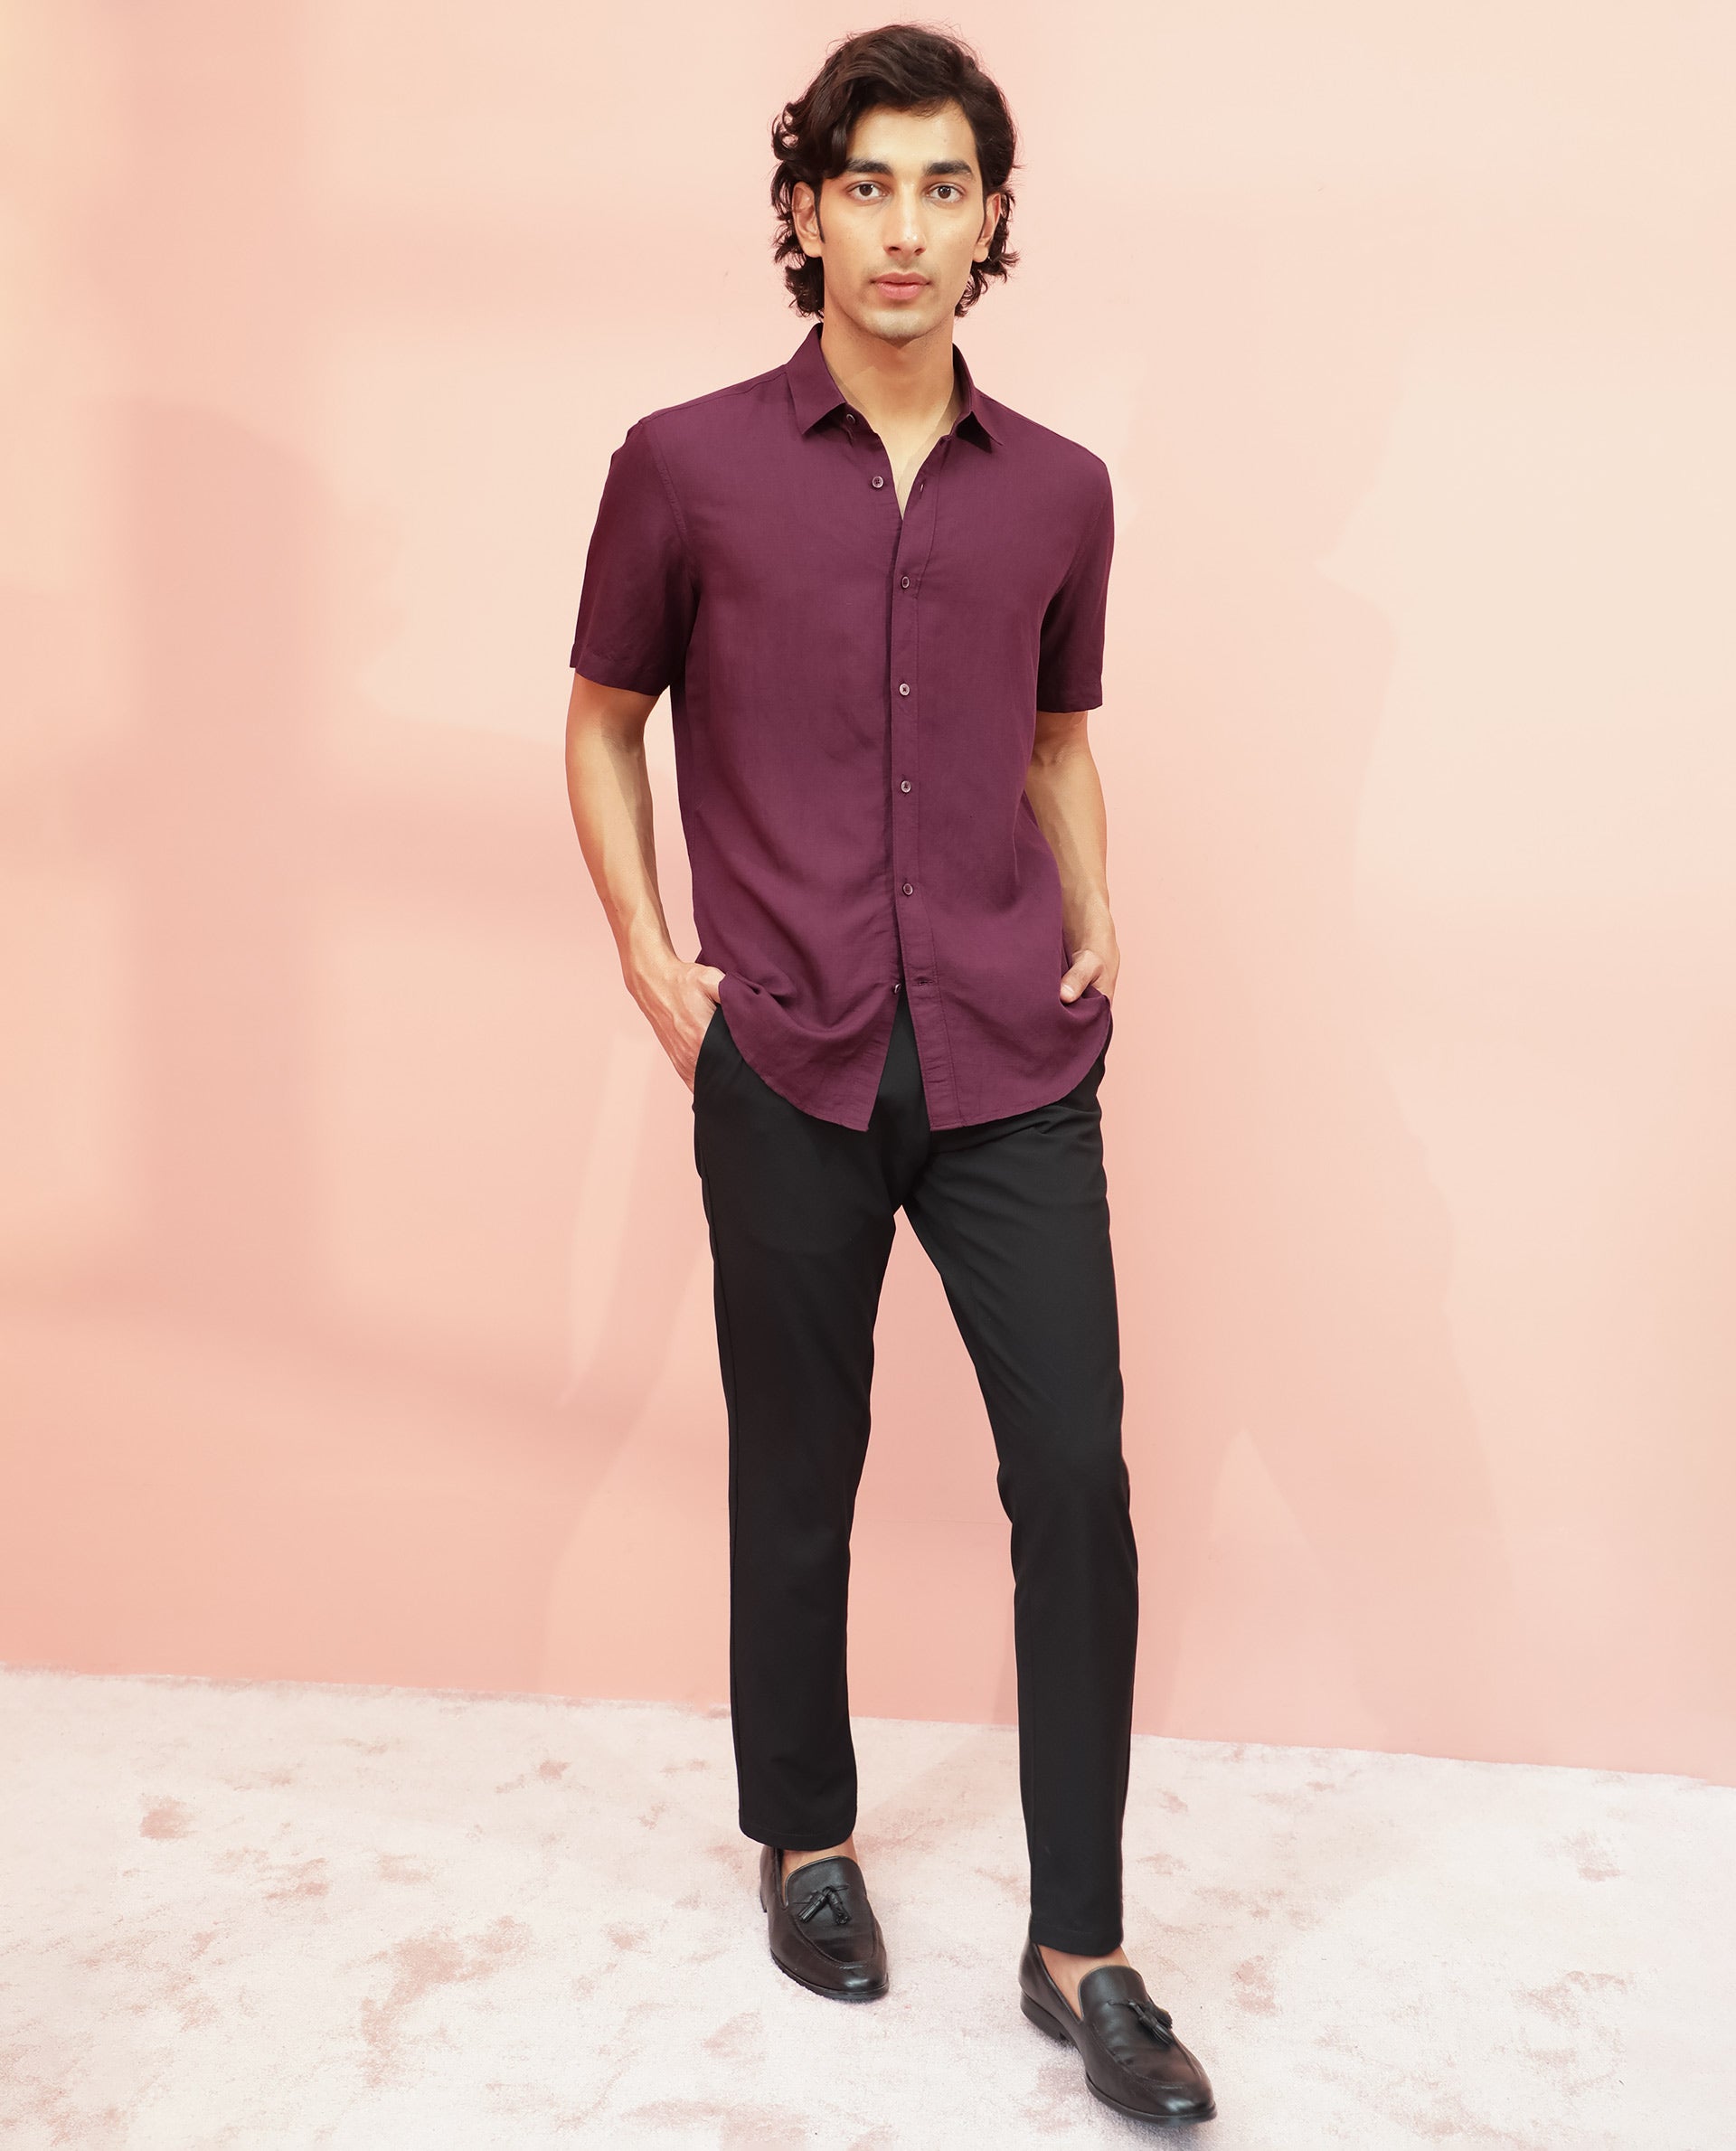 Buy U.S. Polo Assn. Mitered Cuff Solid Pure Cotton Shirt - NNNOW.com